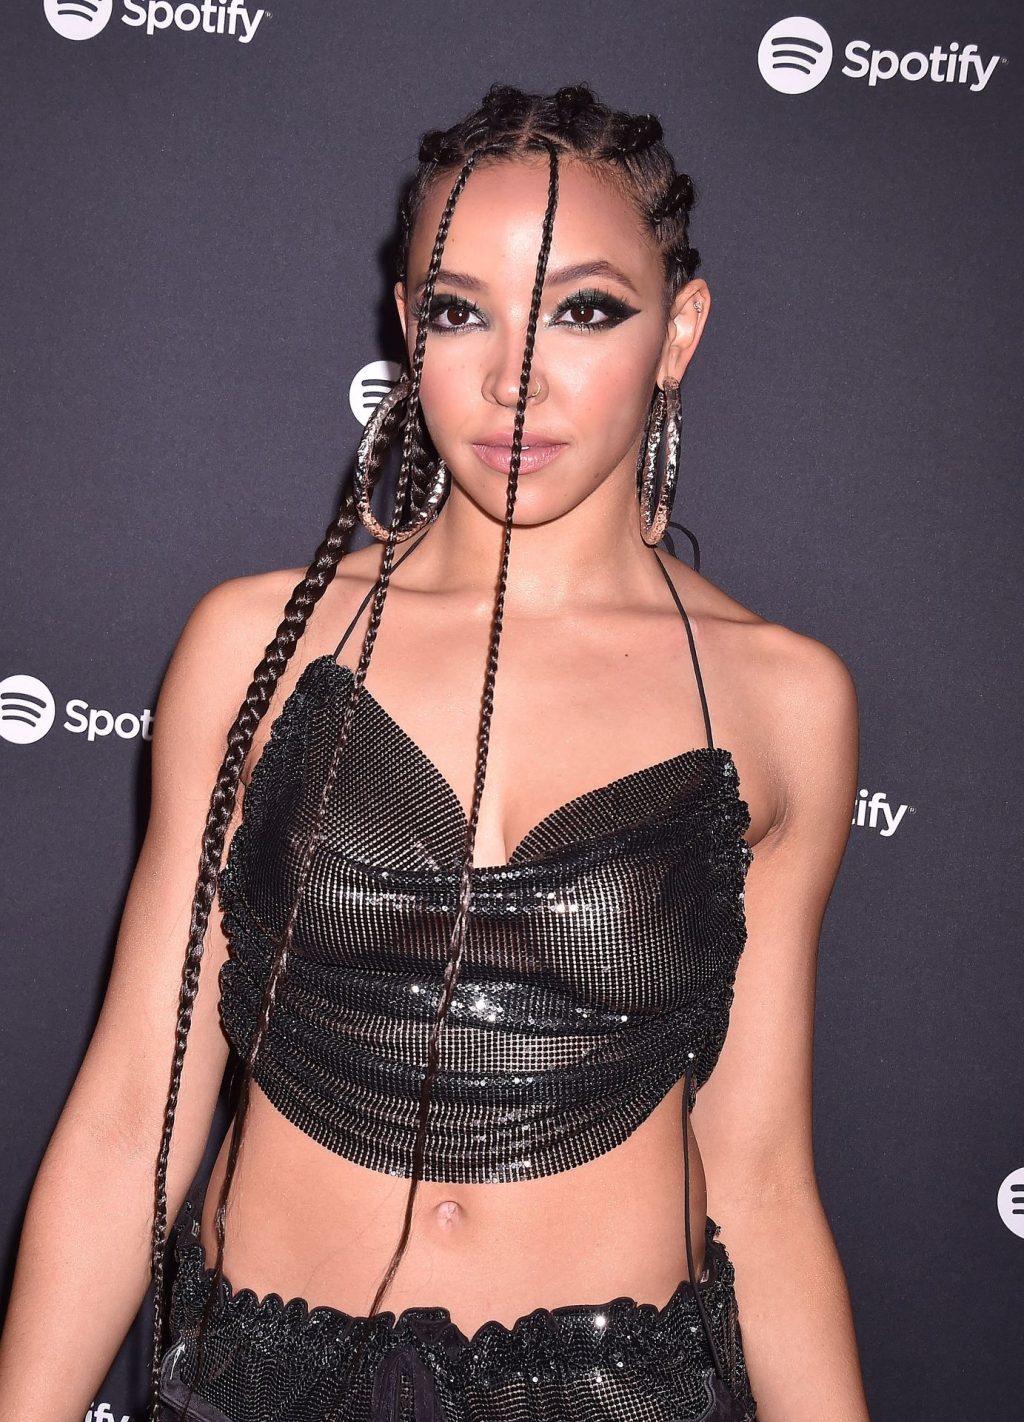 Tinashe Flaunts Her Tits at the Spotify Best New Artist Party (44 Photos)